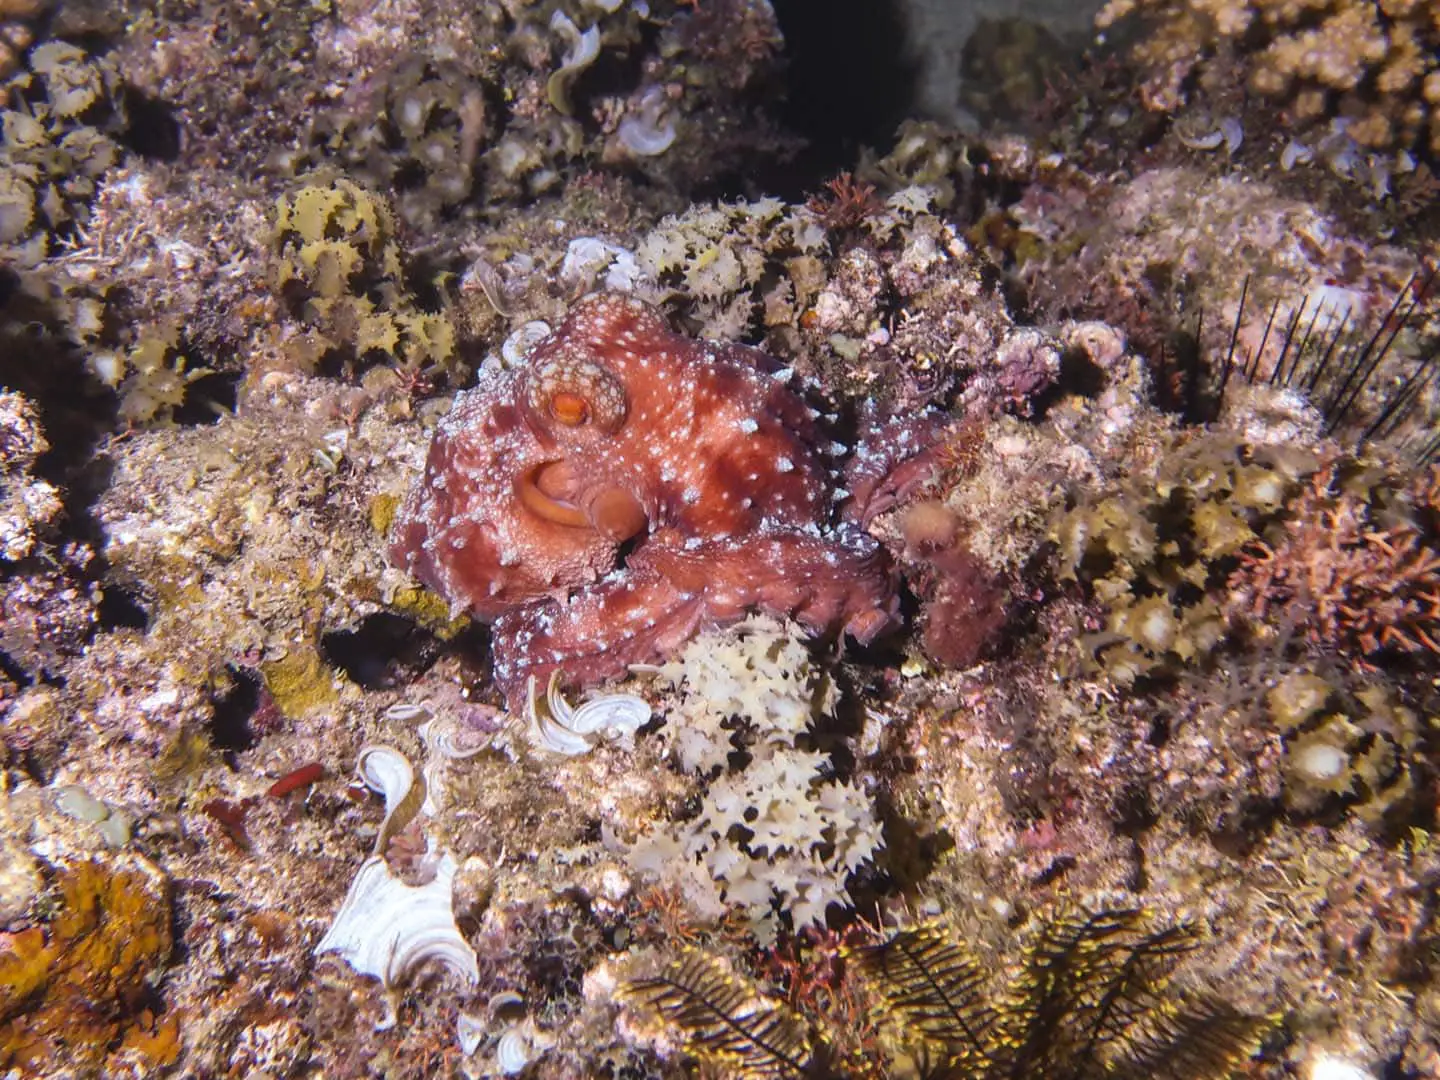 Starry night octopus camouflage on the reef